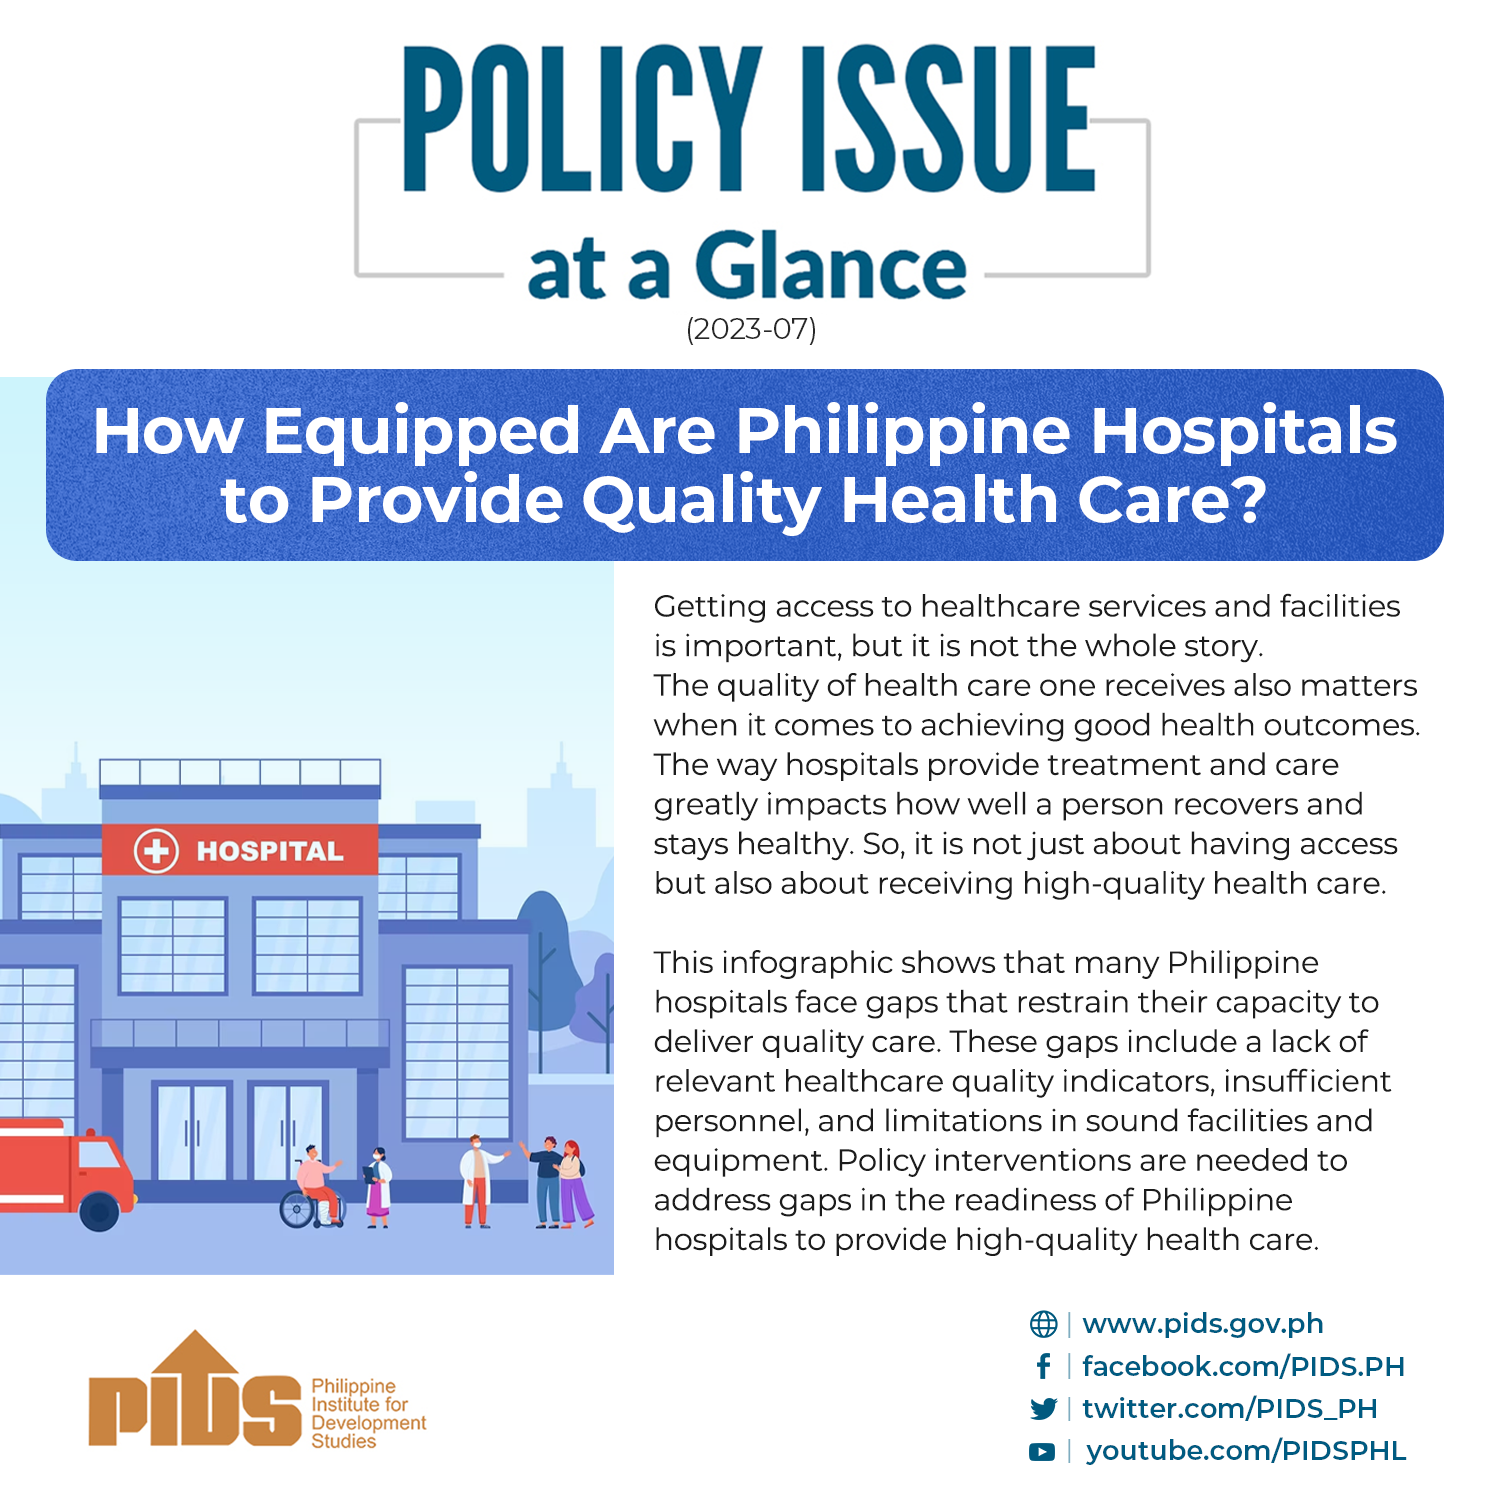 POLICY ISSUE AT A GLANCE: How Equipped Are Philippine Hospitals to Provide Quality Health Care?-2023-07-01.png